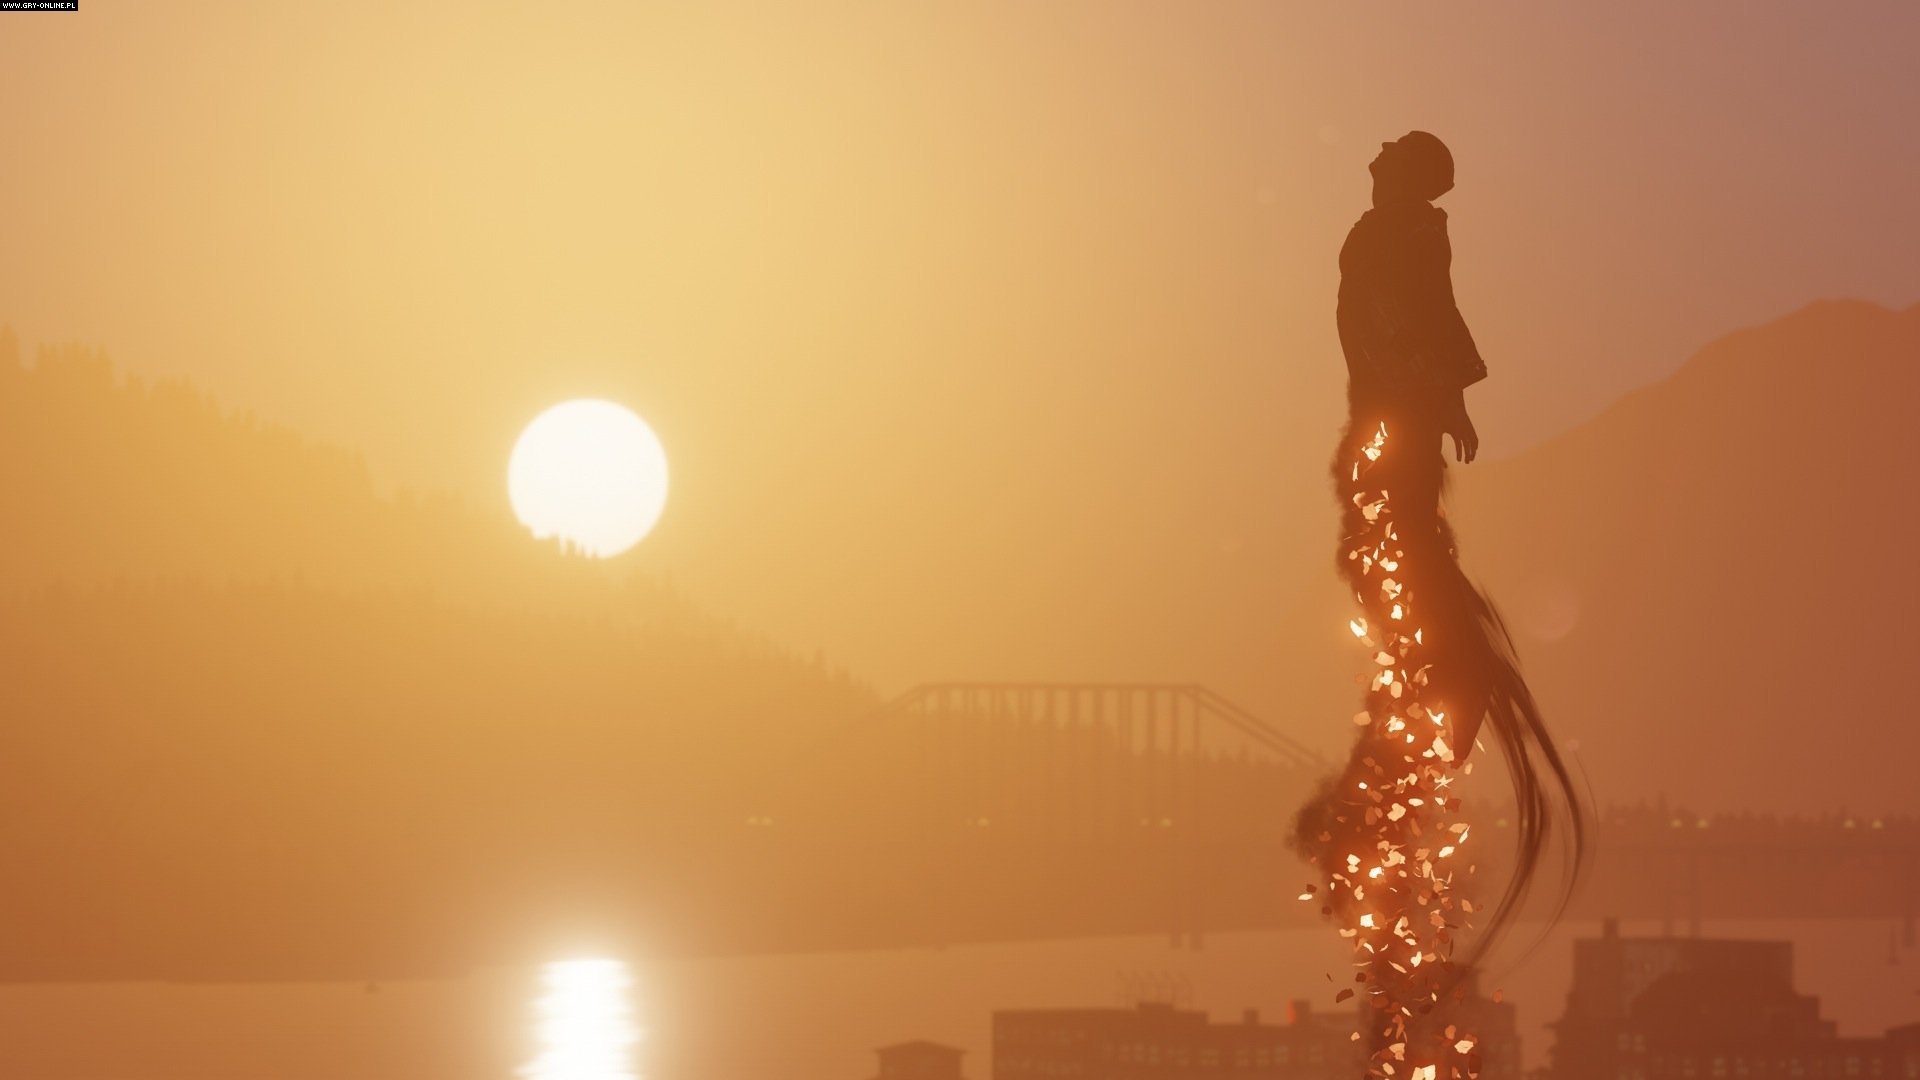 Best InFAMOUS: Second Son wallpaper ID:270098 for High Resolution 1080p computer